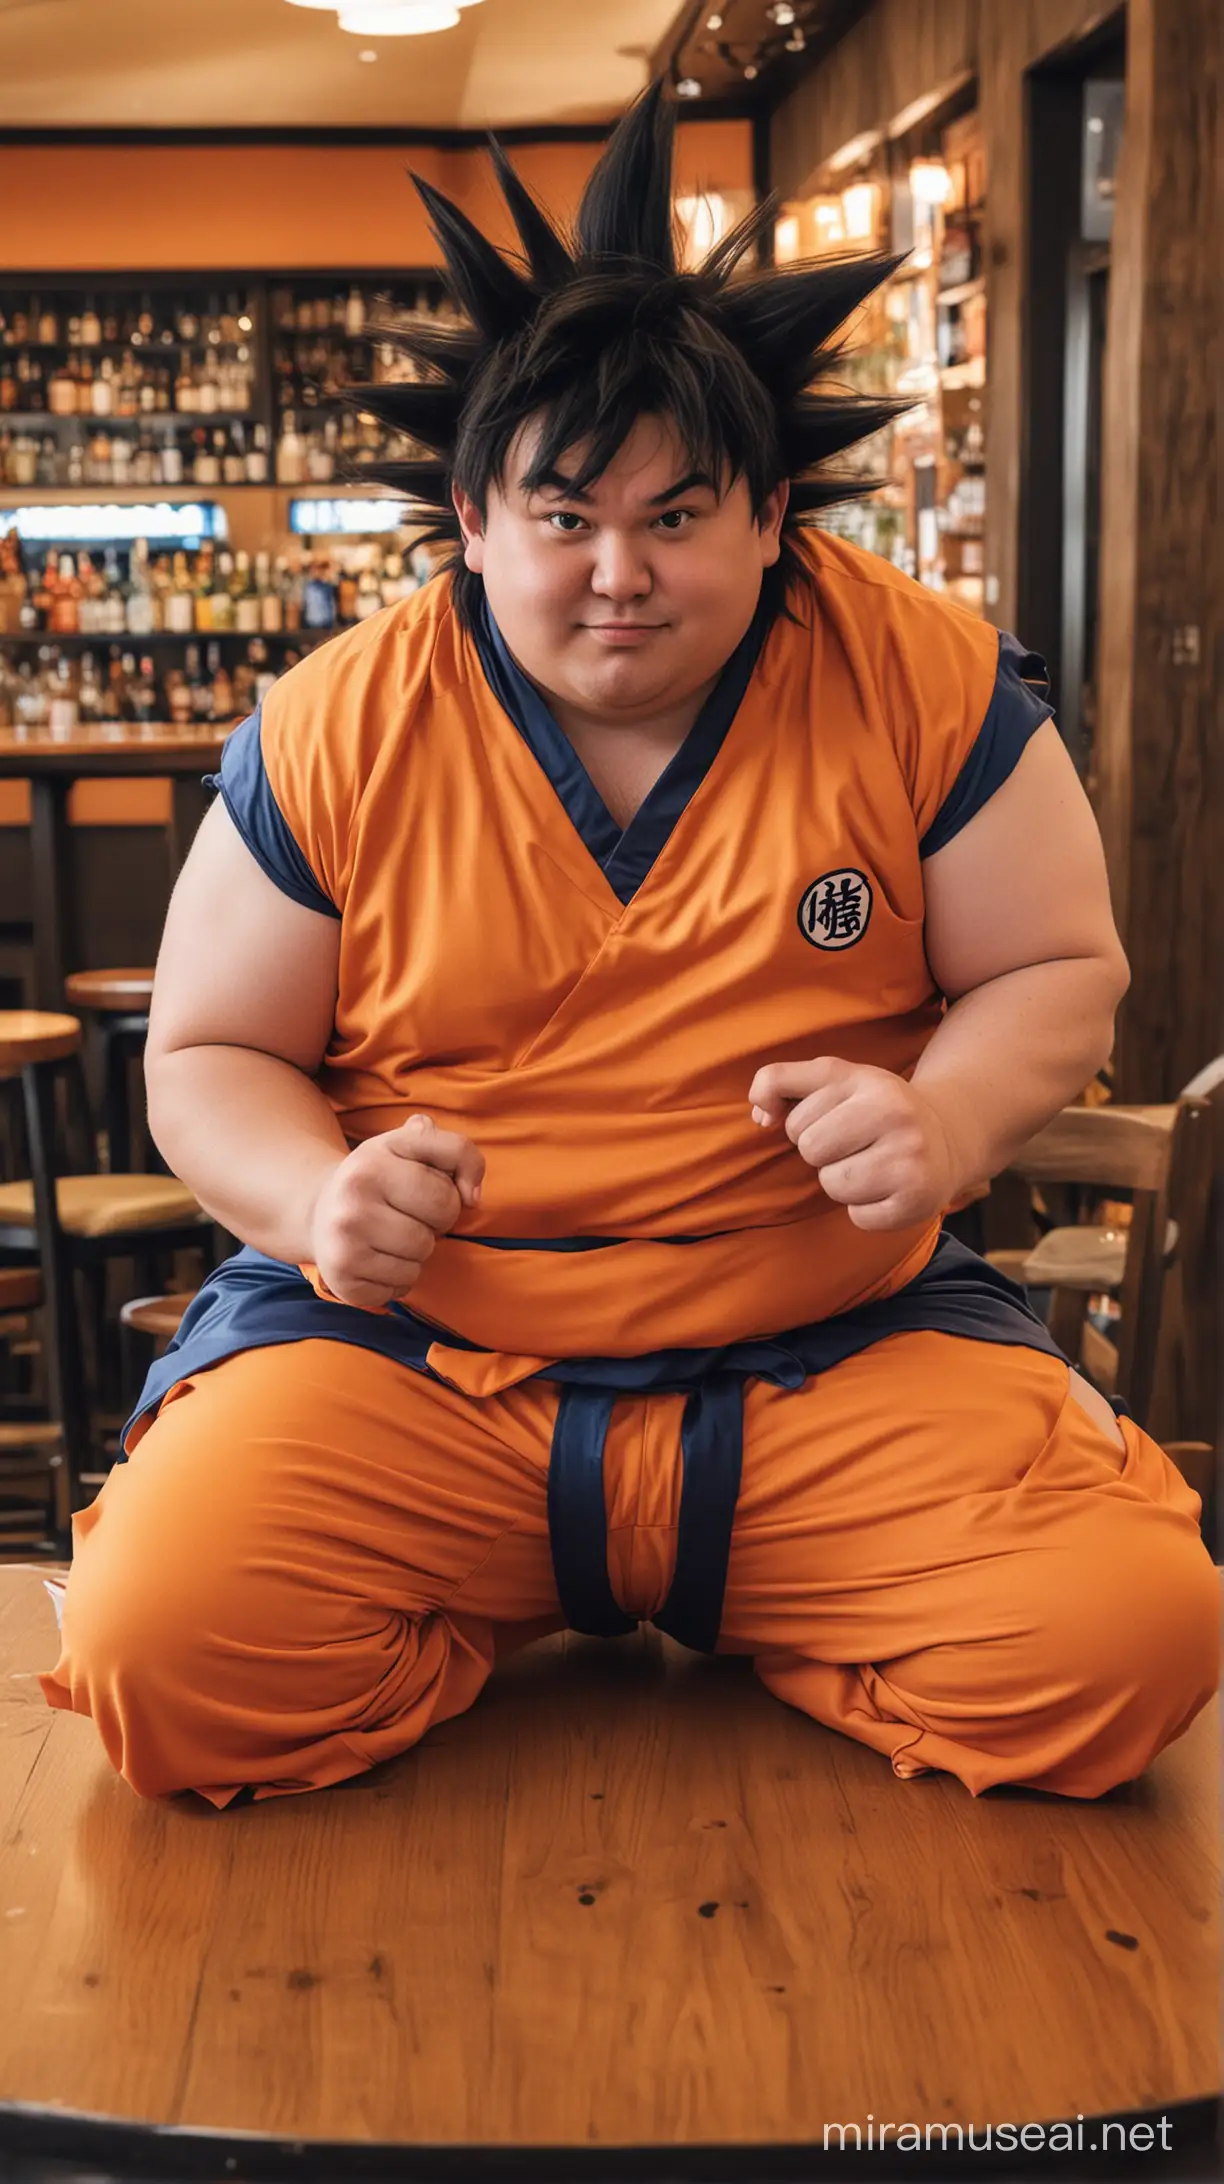 Cosplayer in Goku Costume Relaxing at Bar Table